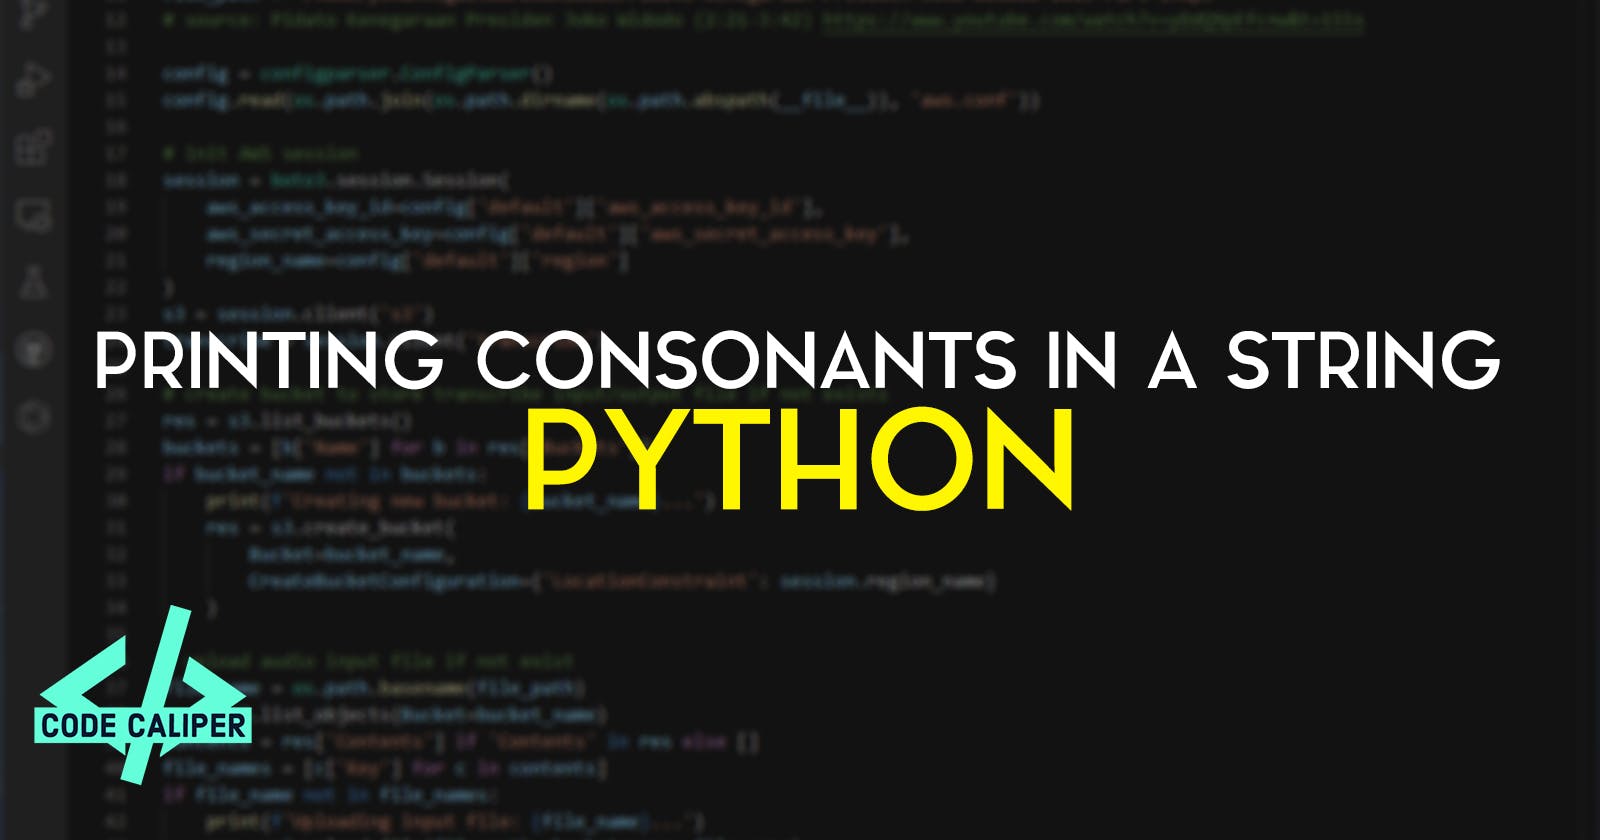 Printing Consonants in a String with Python